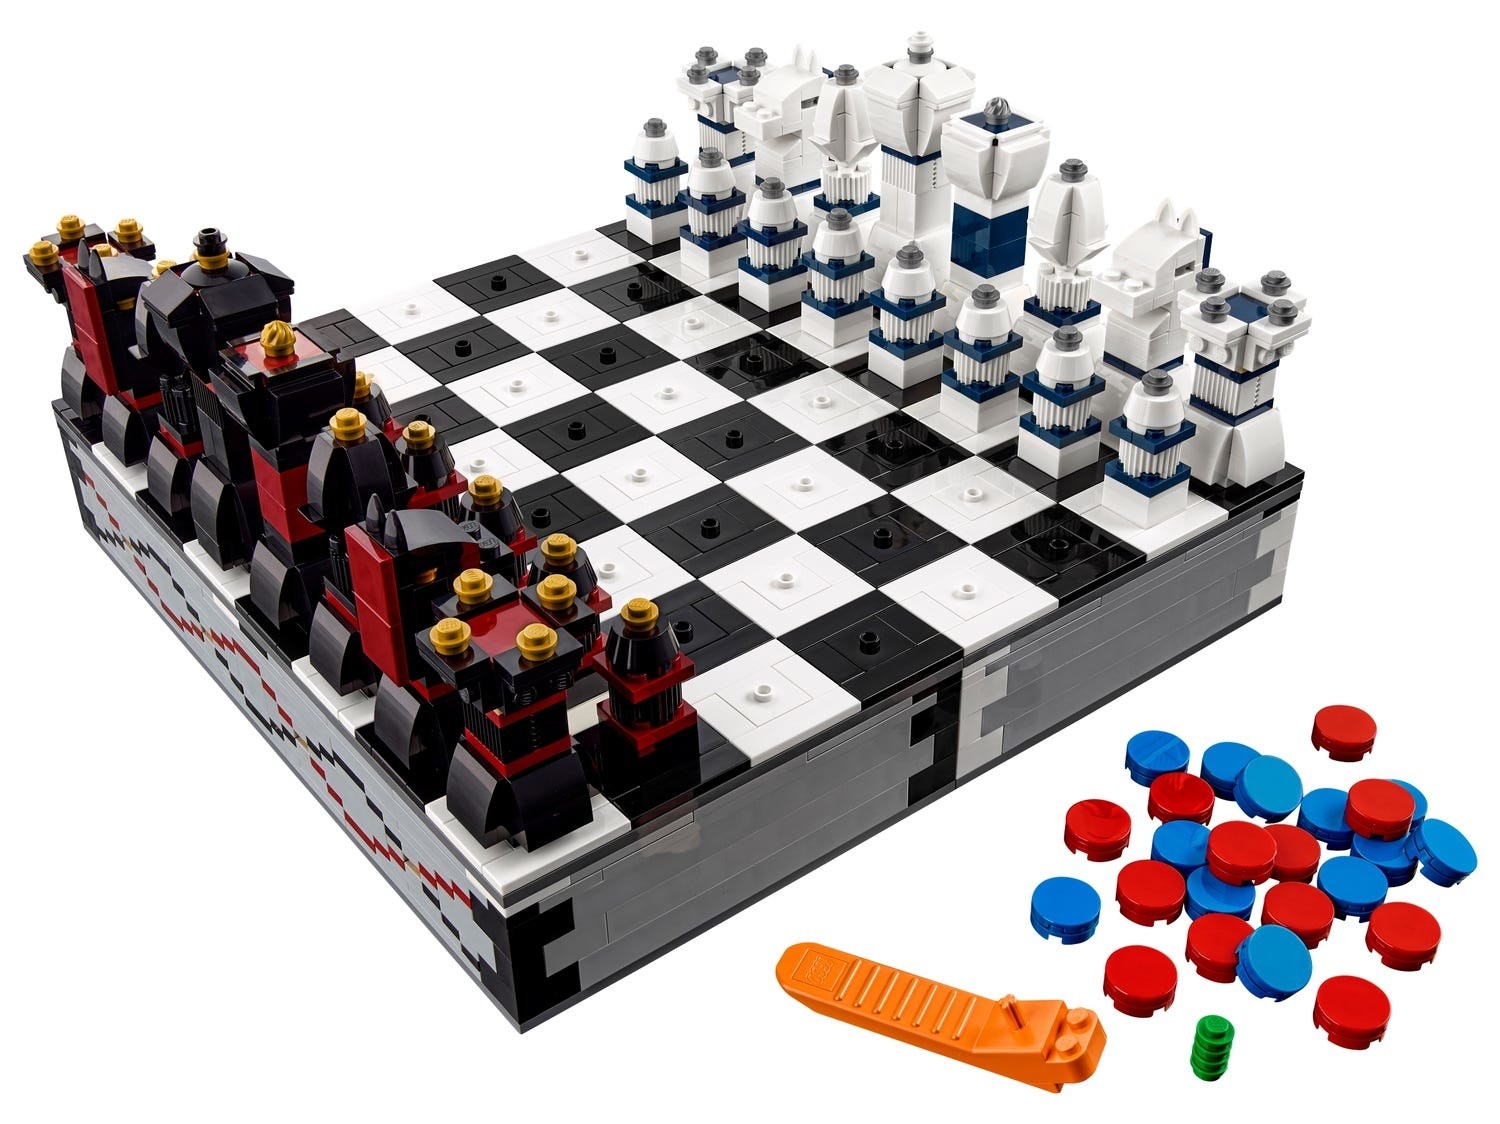 Black and white chessboard and chess piece made of Lego on a white background